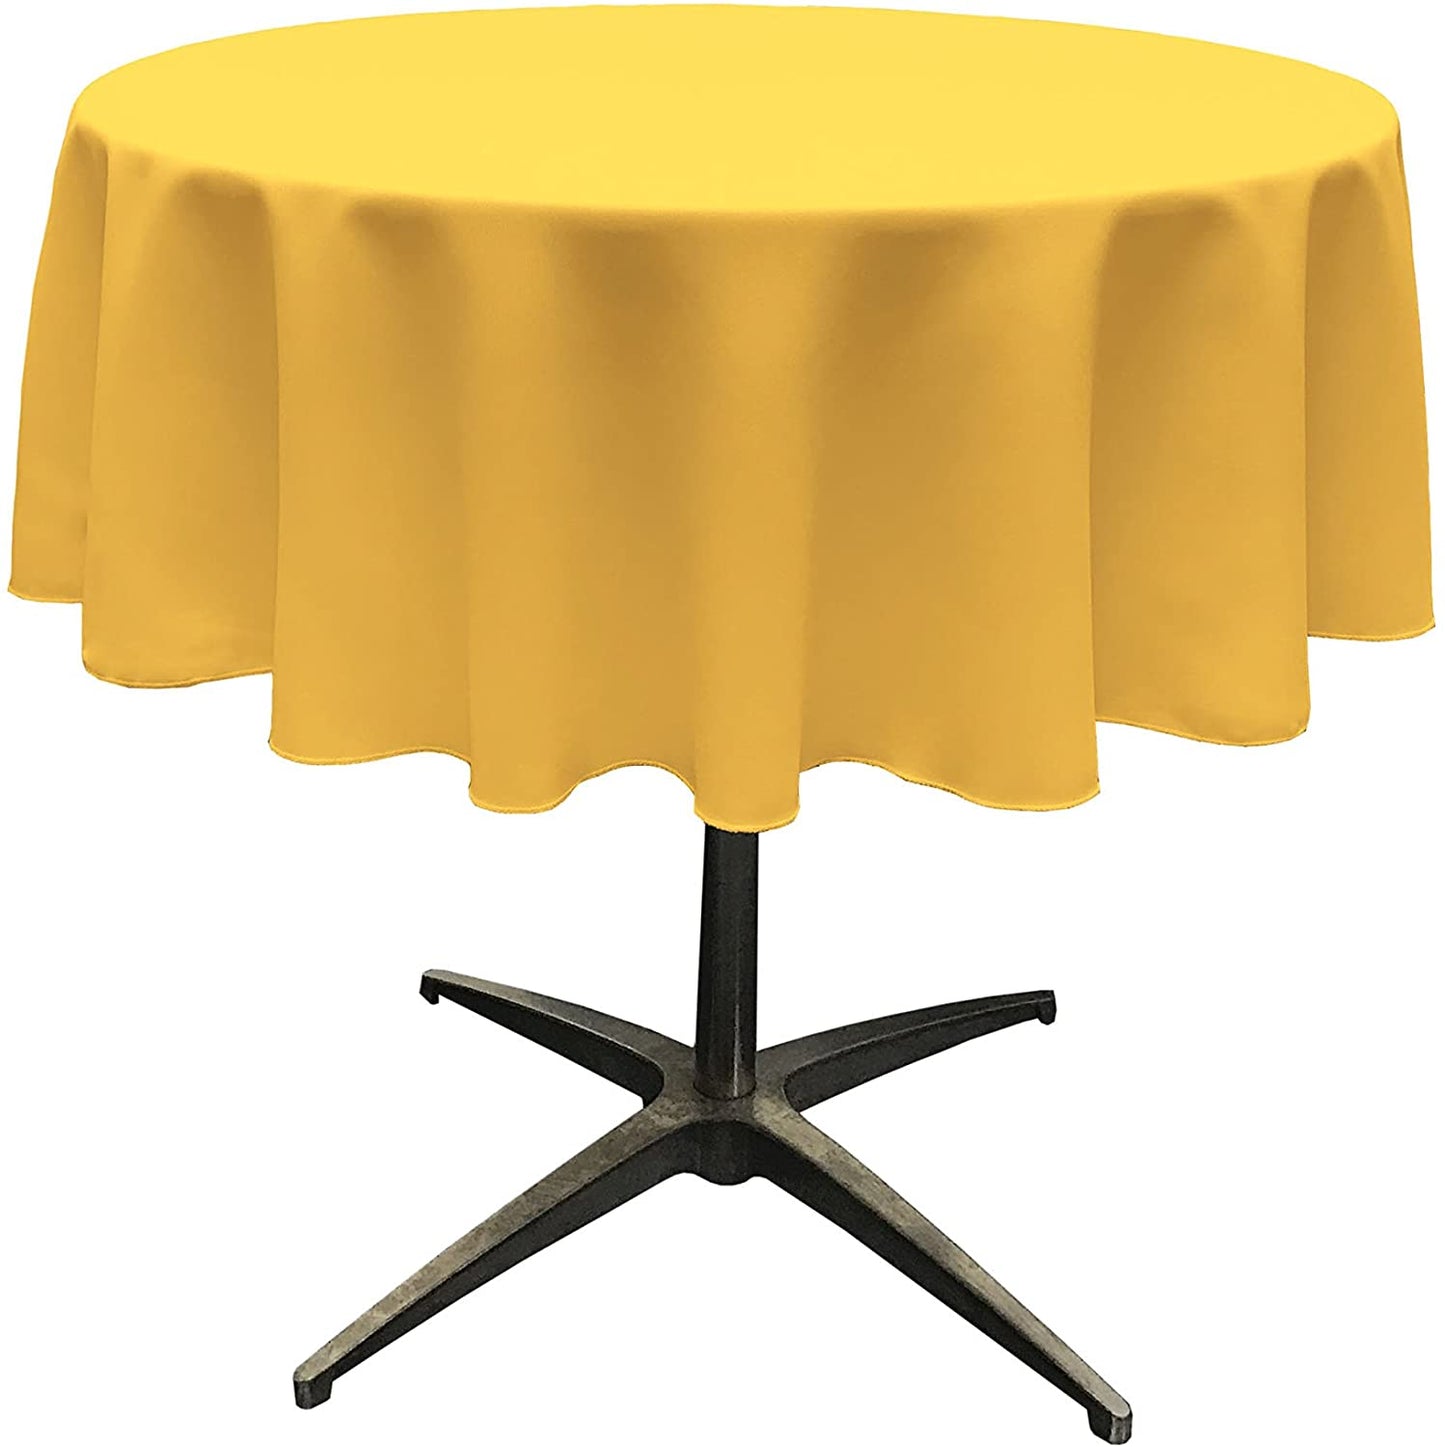 Polyester Poplin Washable Round Tablecloth, Stain and Wrinkle Resistant Table Cover Dk Yellow